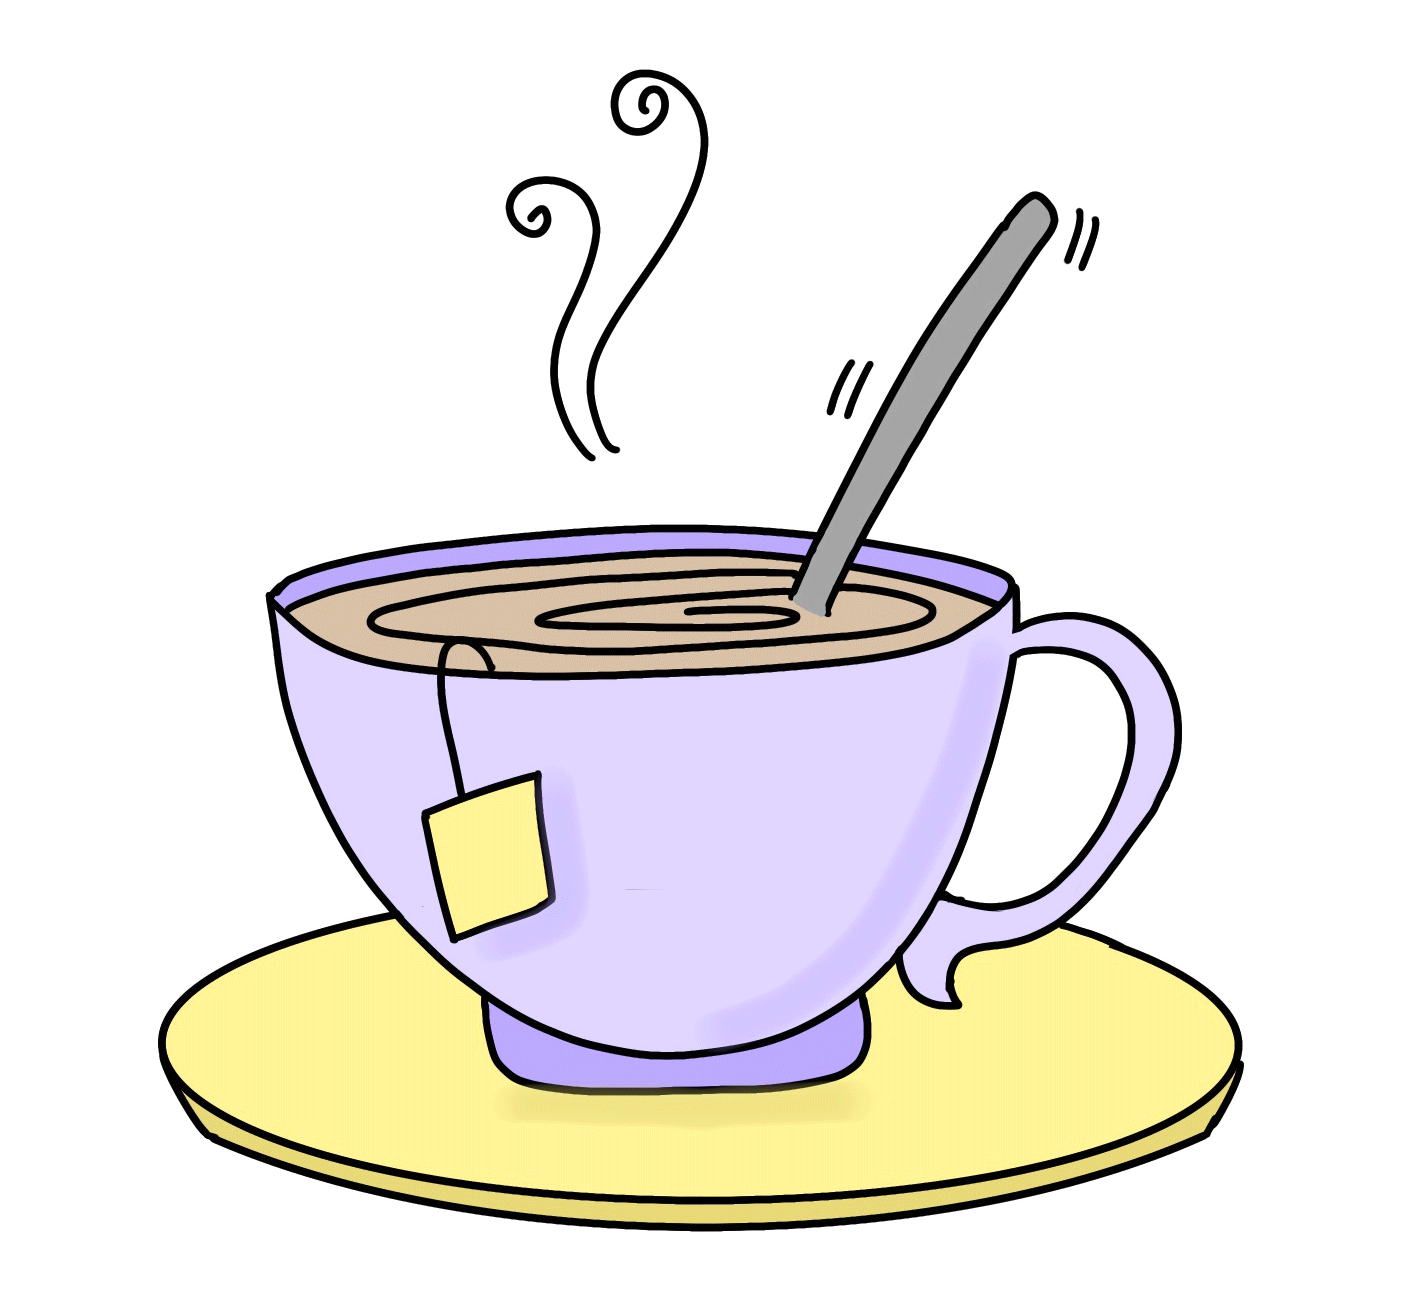 an animatied illustration of a teacup that never stops stirring